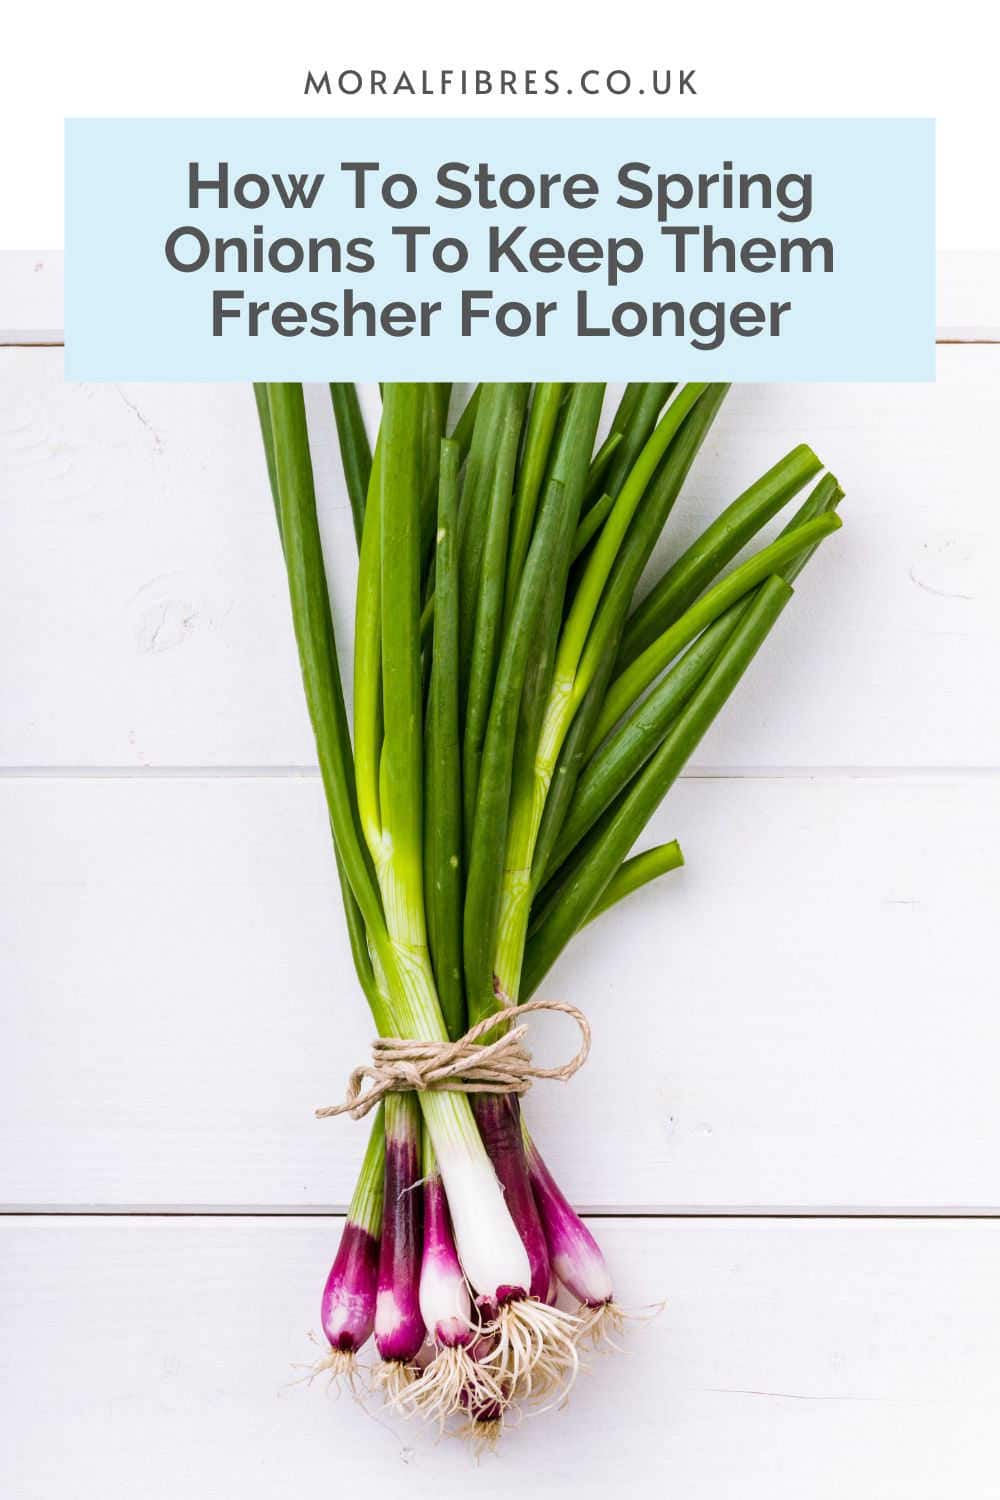 Bunch of spring onions on a white background with a blue text box that reads how to store spring onions to keep them fresher for longer